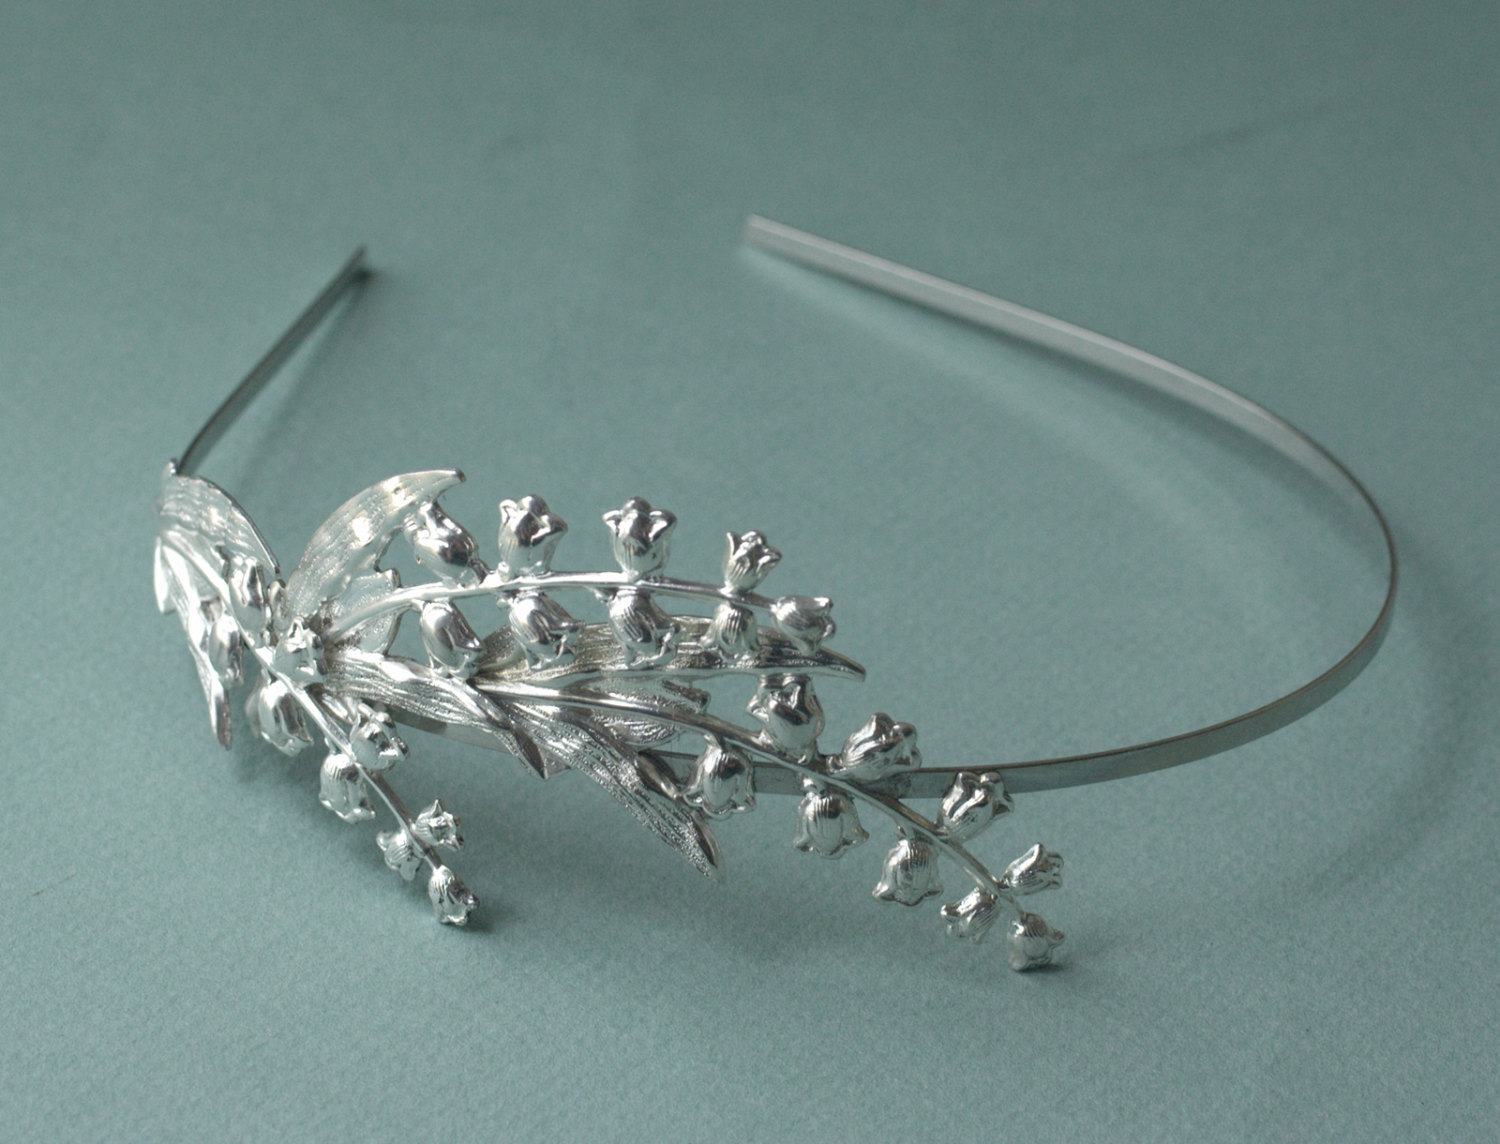 Lily of the Valley Bridal Headband from My Lavaliere